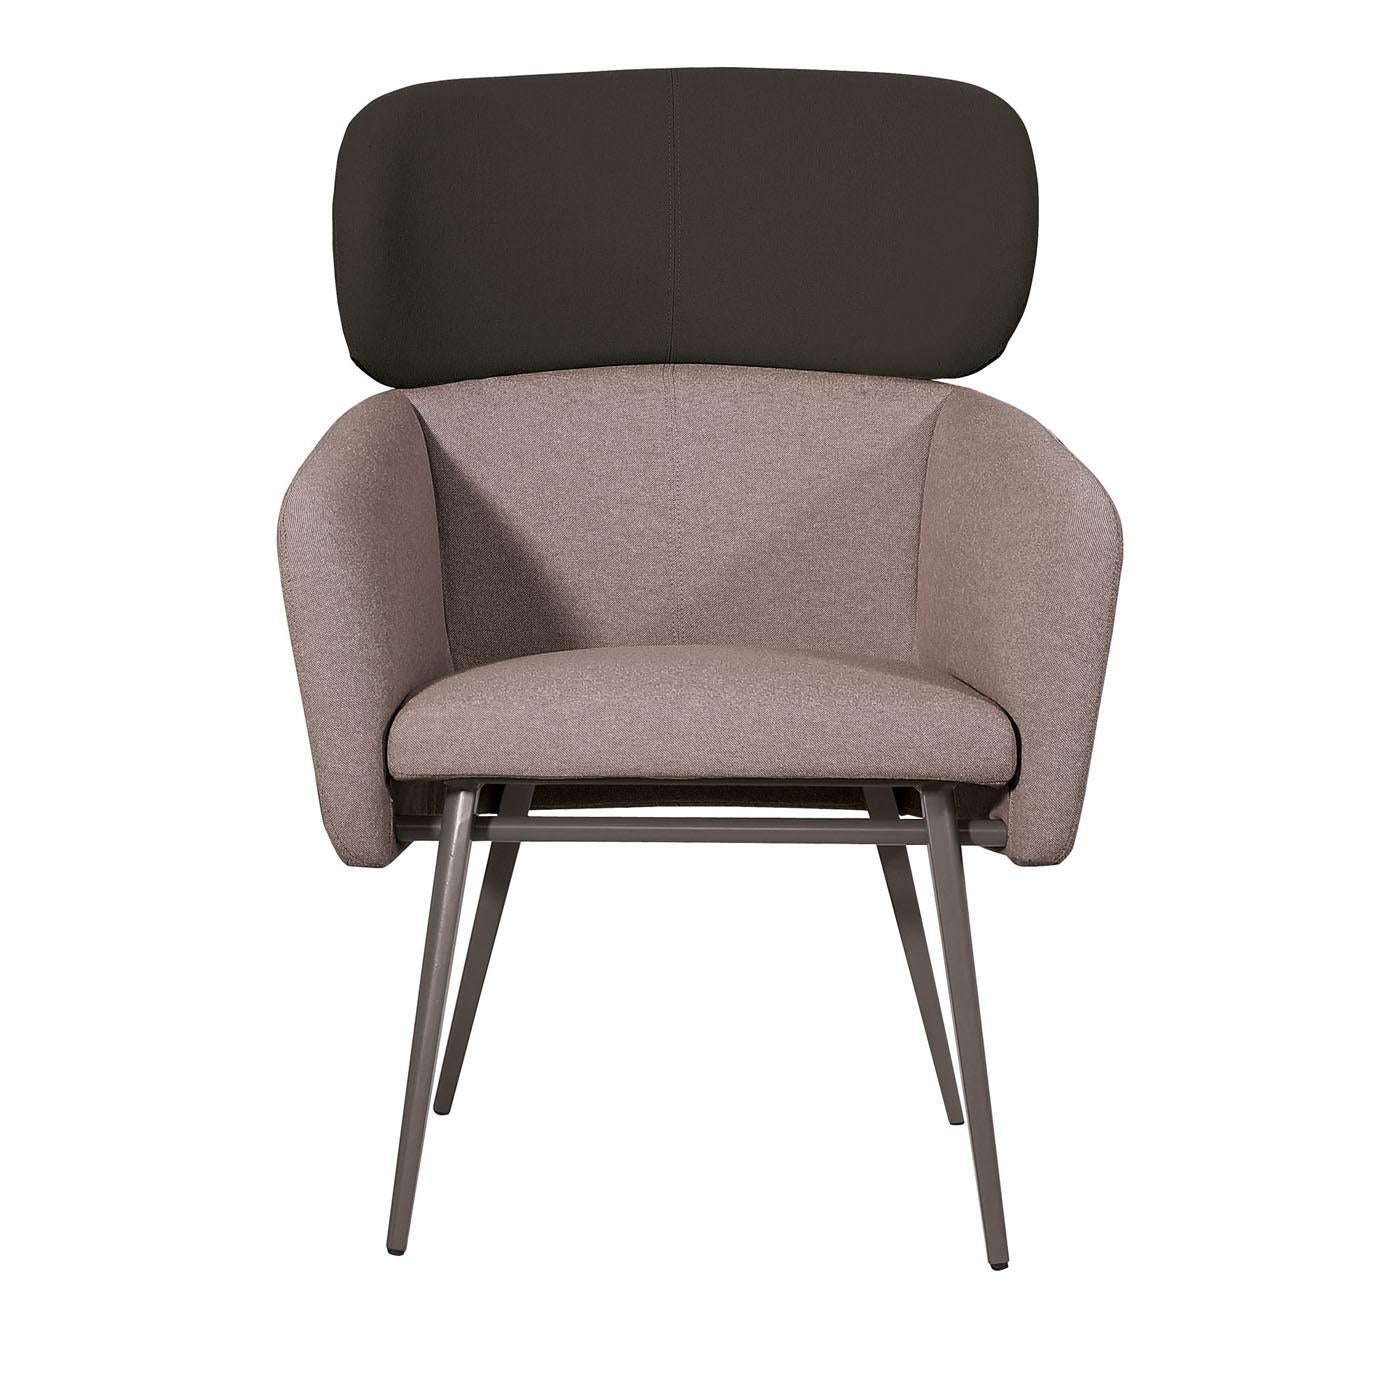 Balù XL Met Gray and Black Chair by Emilio Nanni In New Condition For Sale In Milan, IT